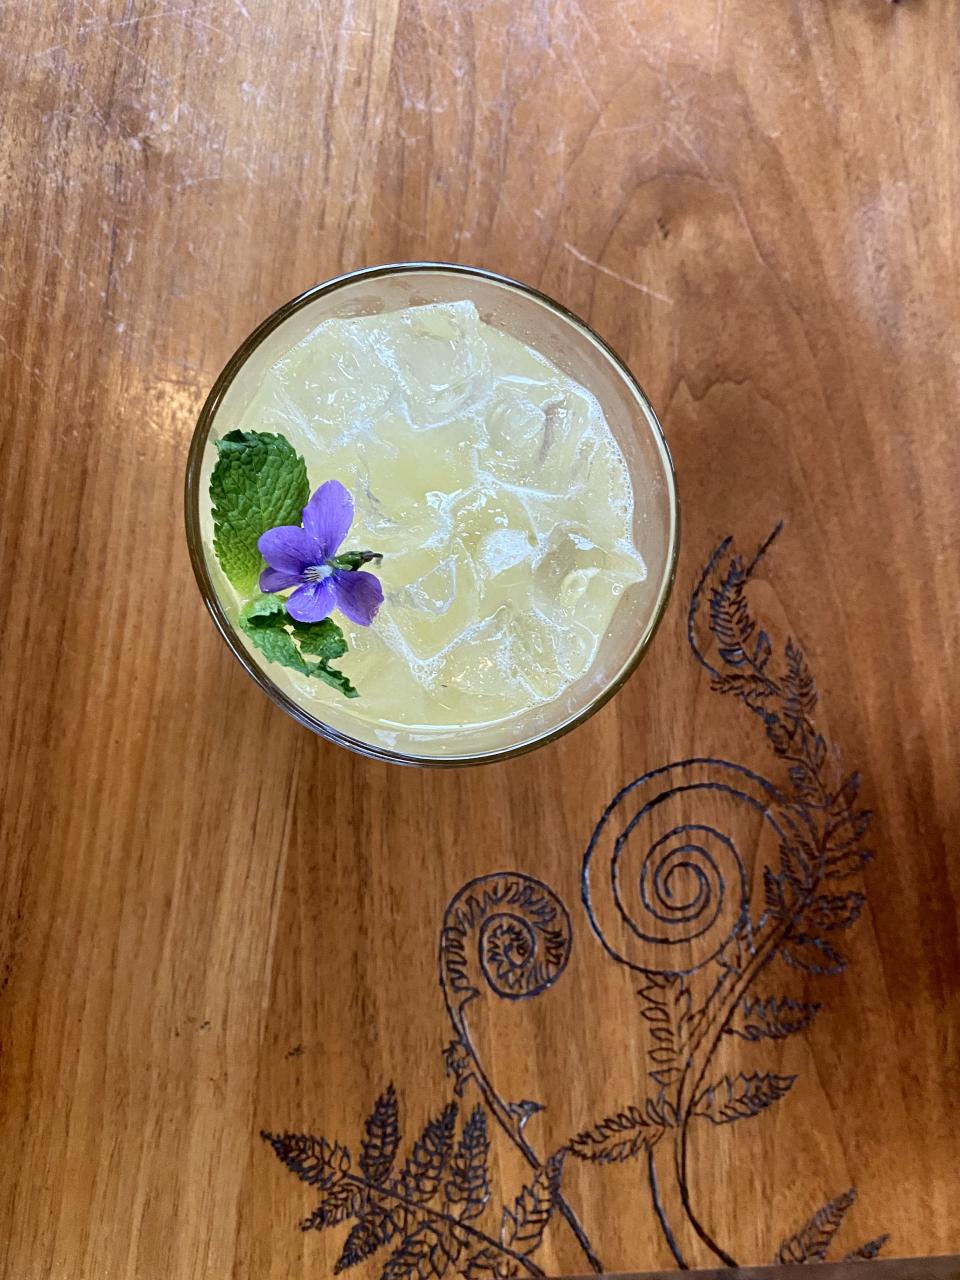 lemonade with flower garnish on table with wood carving of a fiddlehead fern